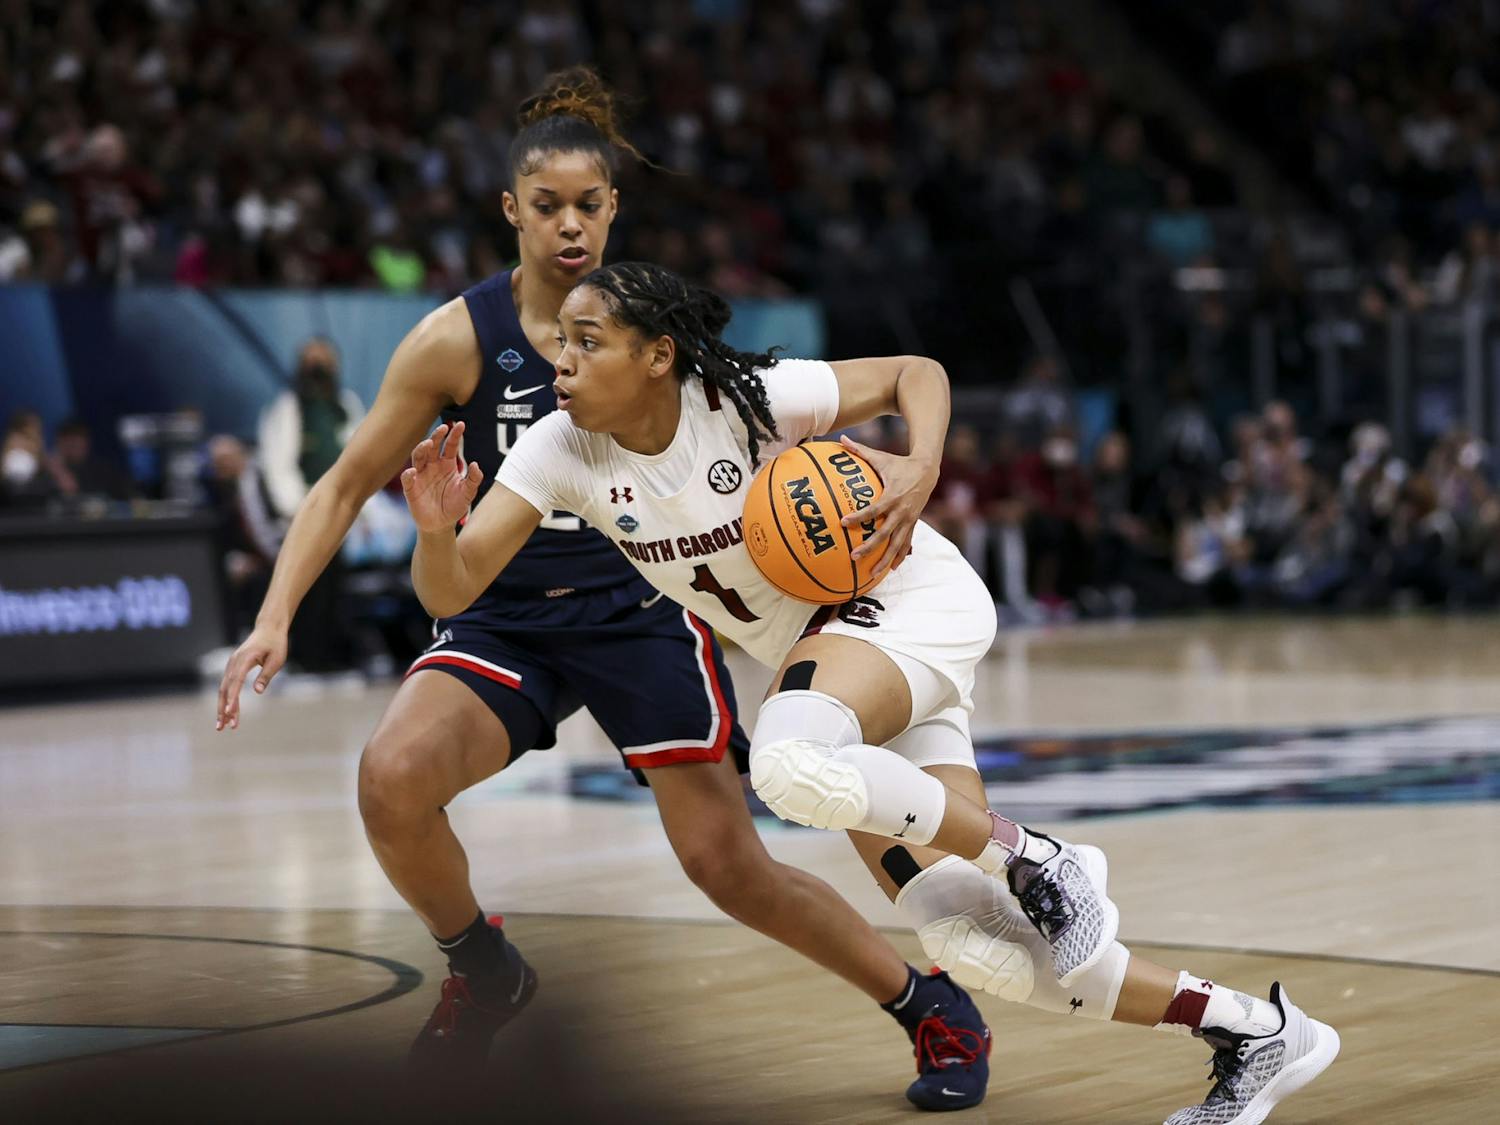 Junior guard Zia Cooke drives the ball inside the paint during the third quarter of South Carolina's 64-49 victory over University of Connecticut, winning the 2022 National Championship on April 4, 2022.